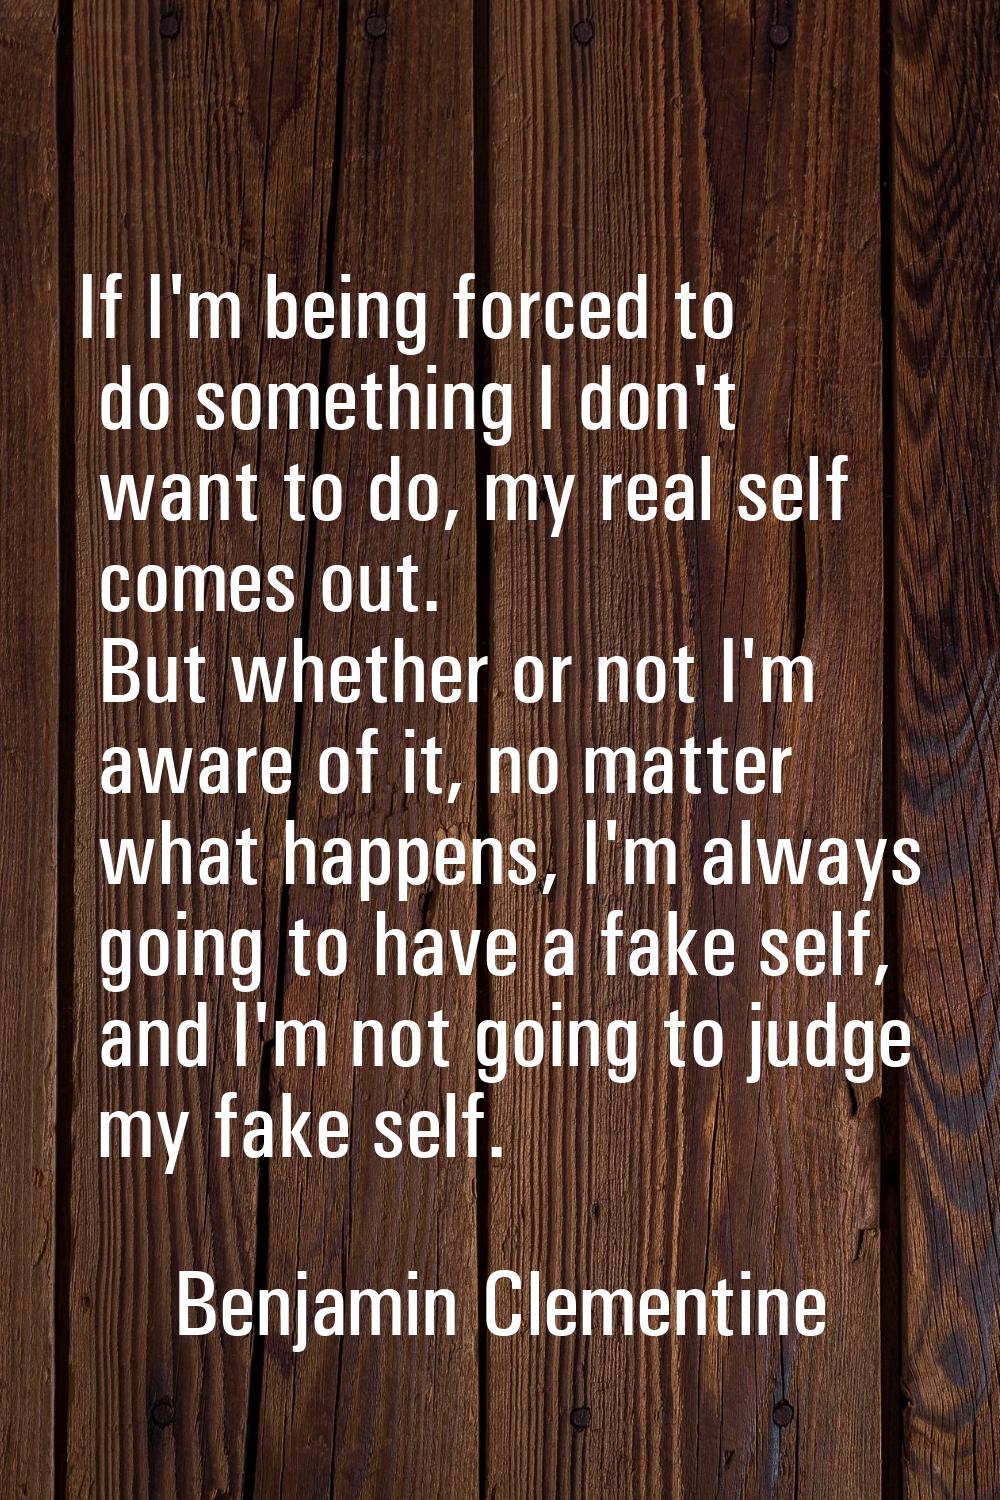 If I'm being forced to do something I don't want to do, my real self comes out. But whether or not 